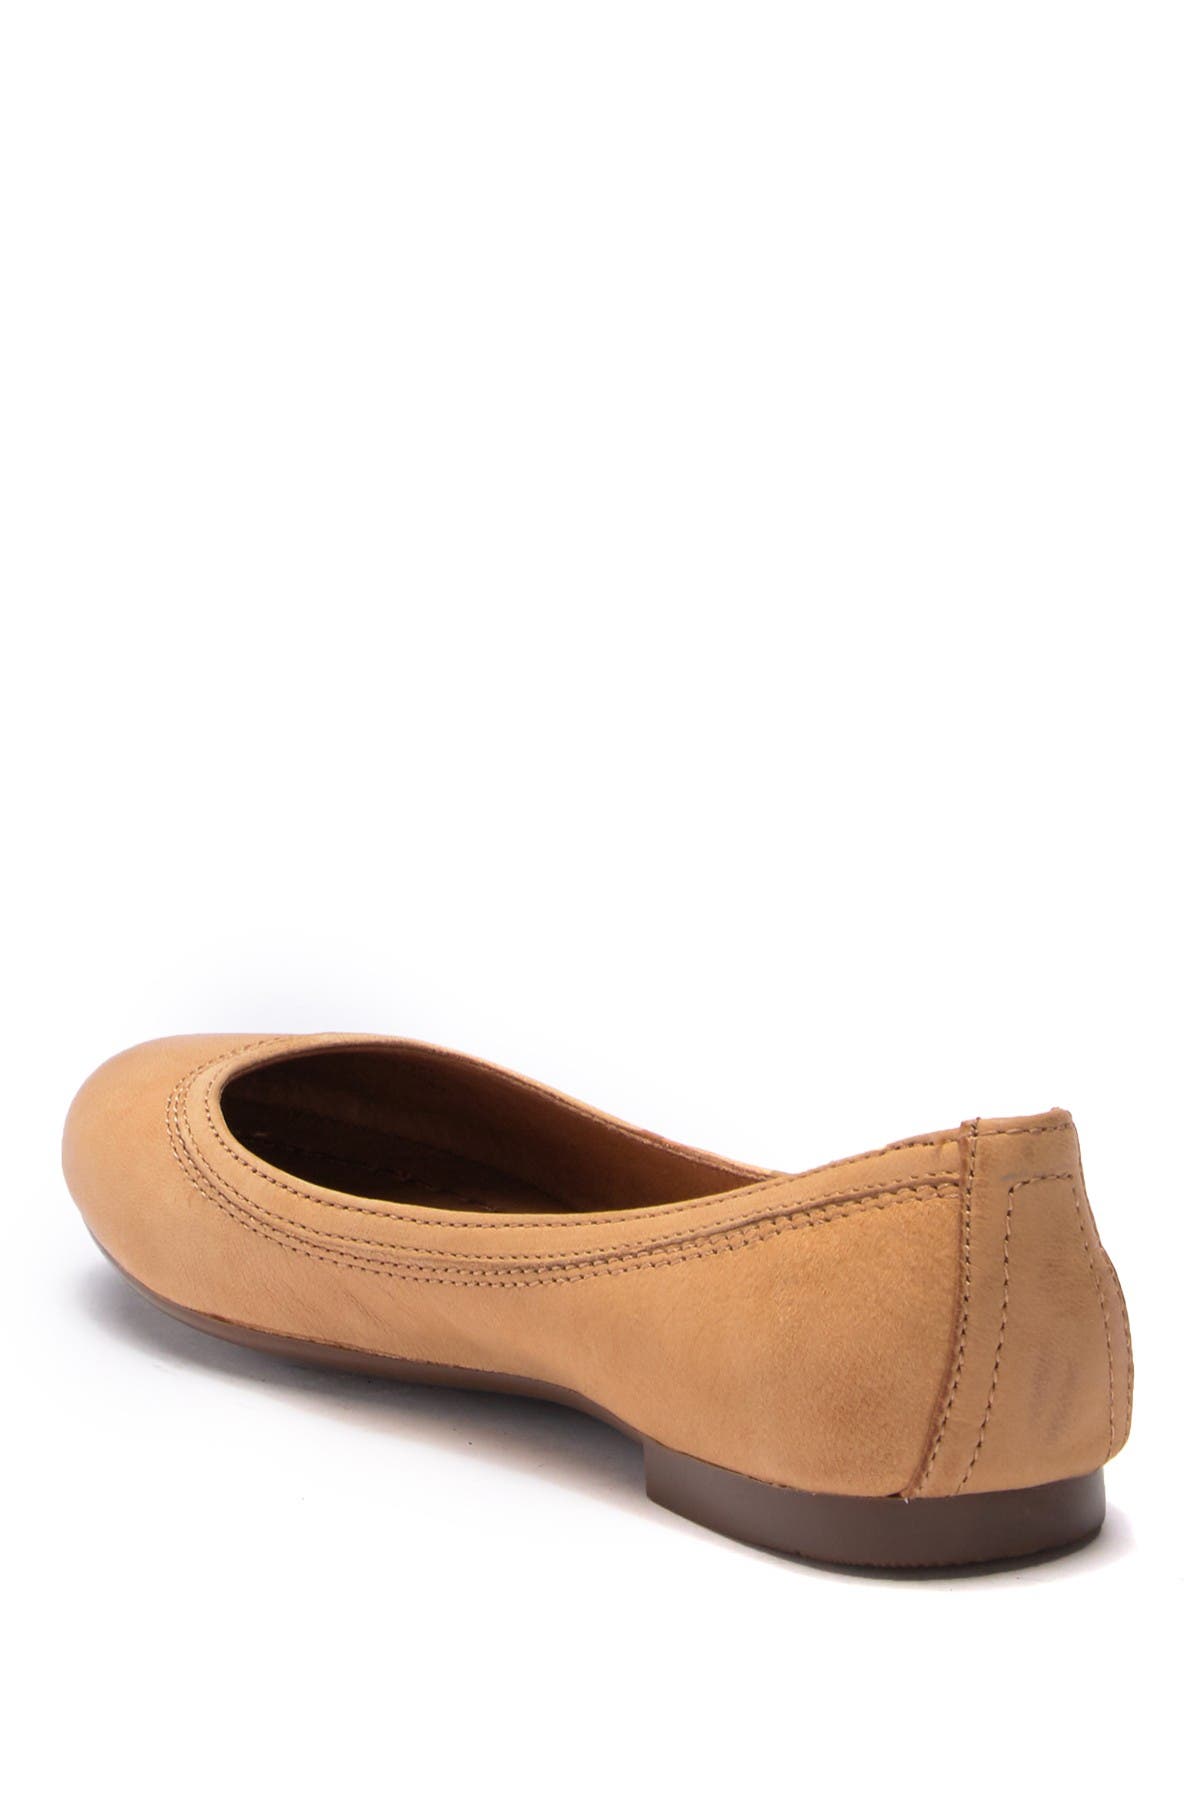 frye carrie leather flat